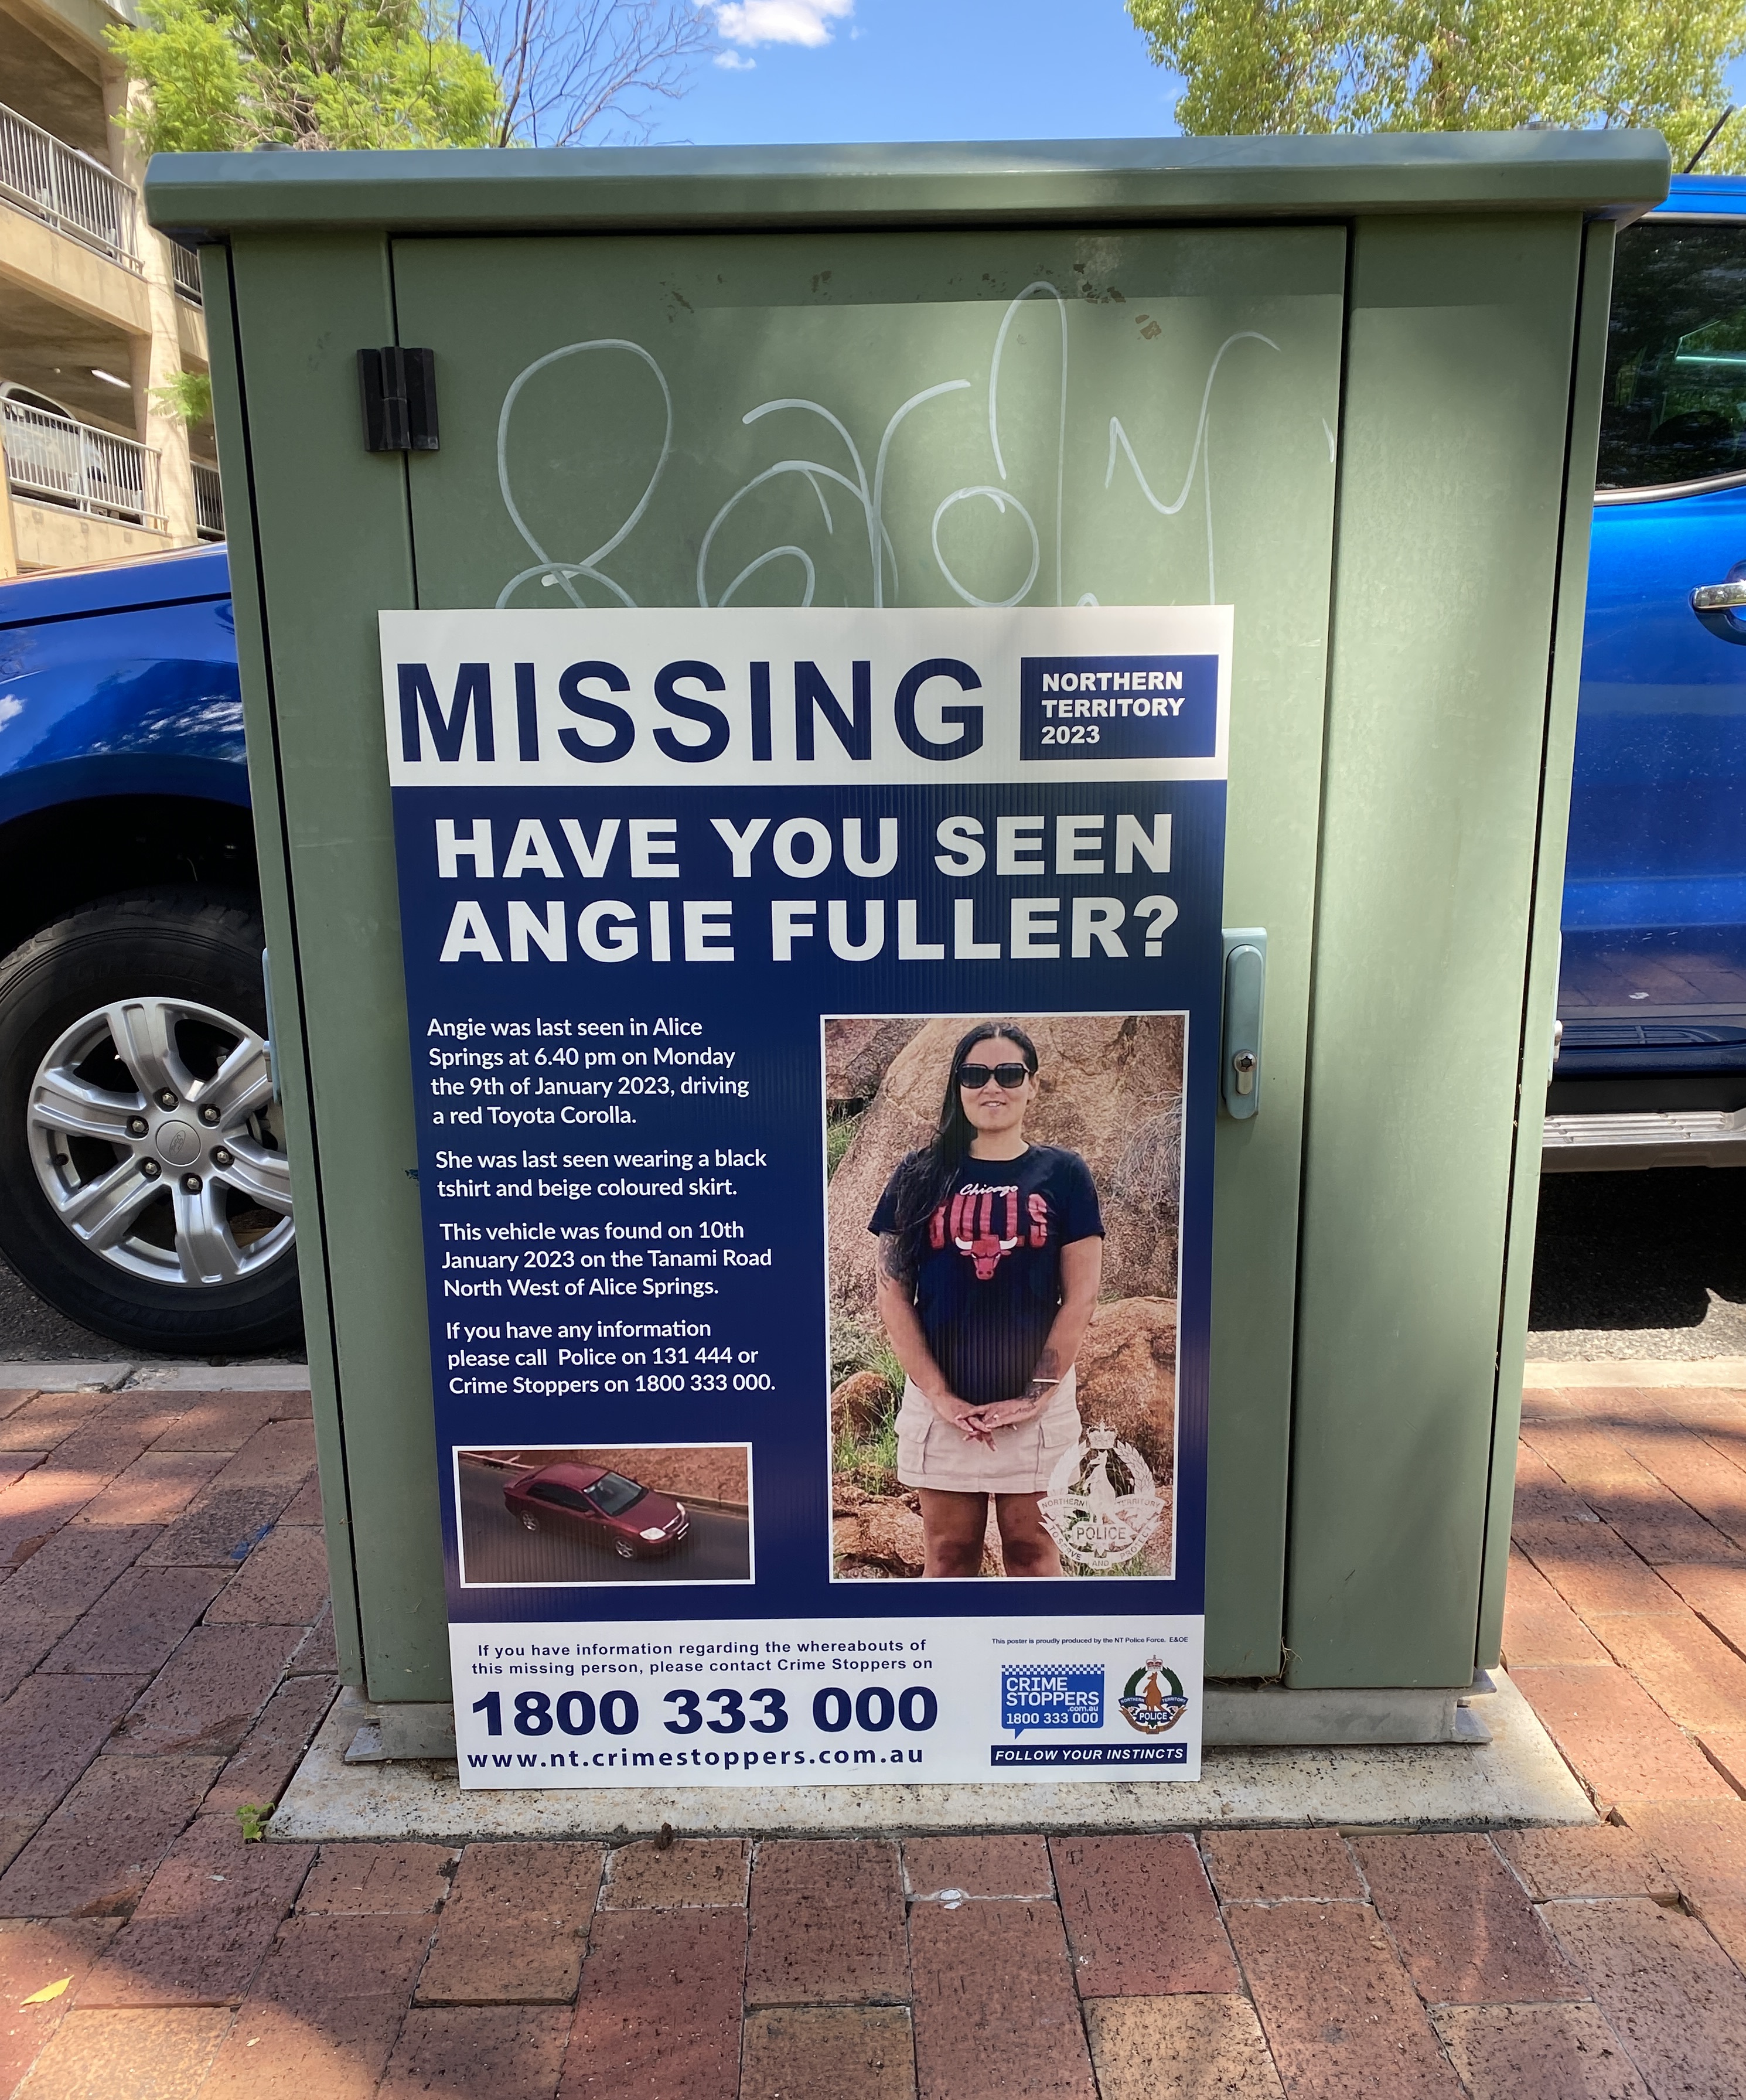 A missing police poster asking 'where is Angie Fuller', including photos of her and her car